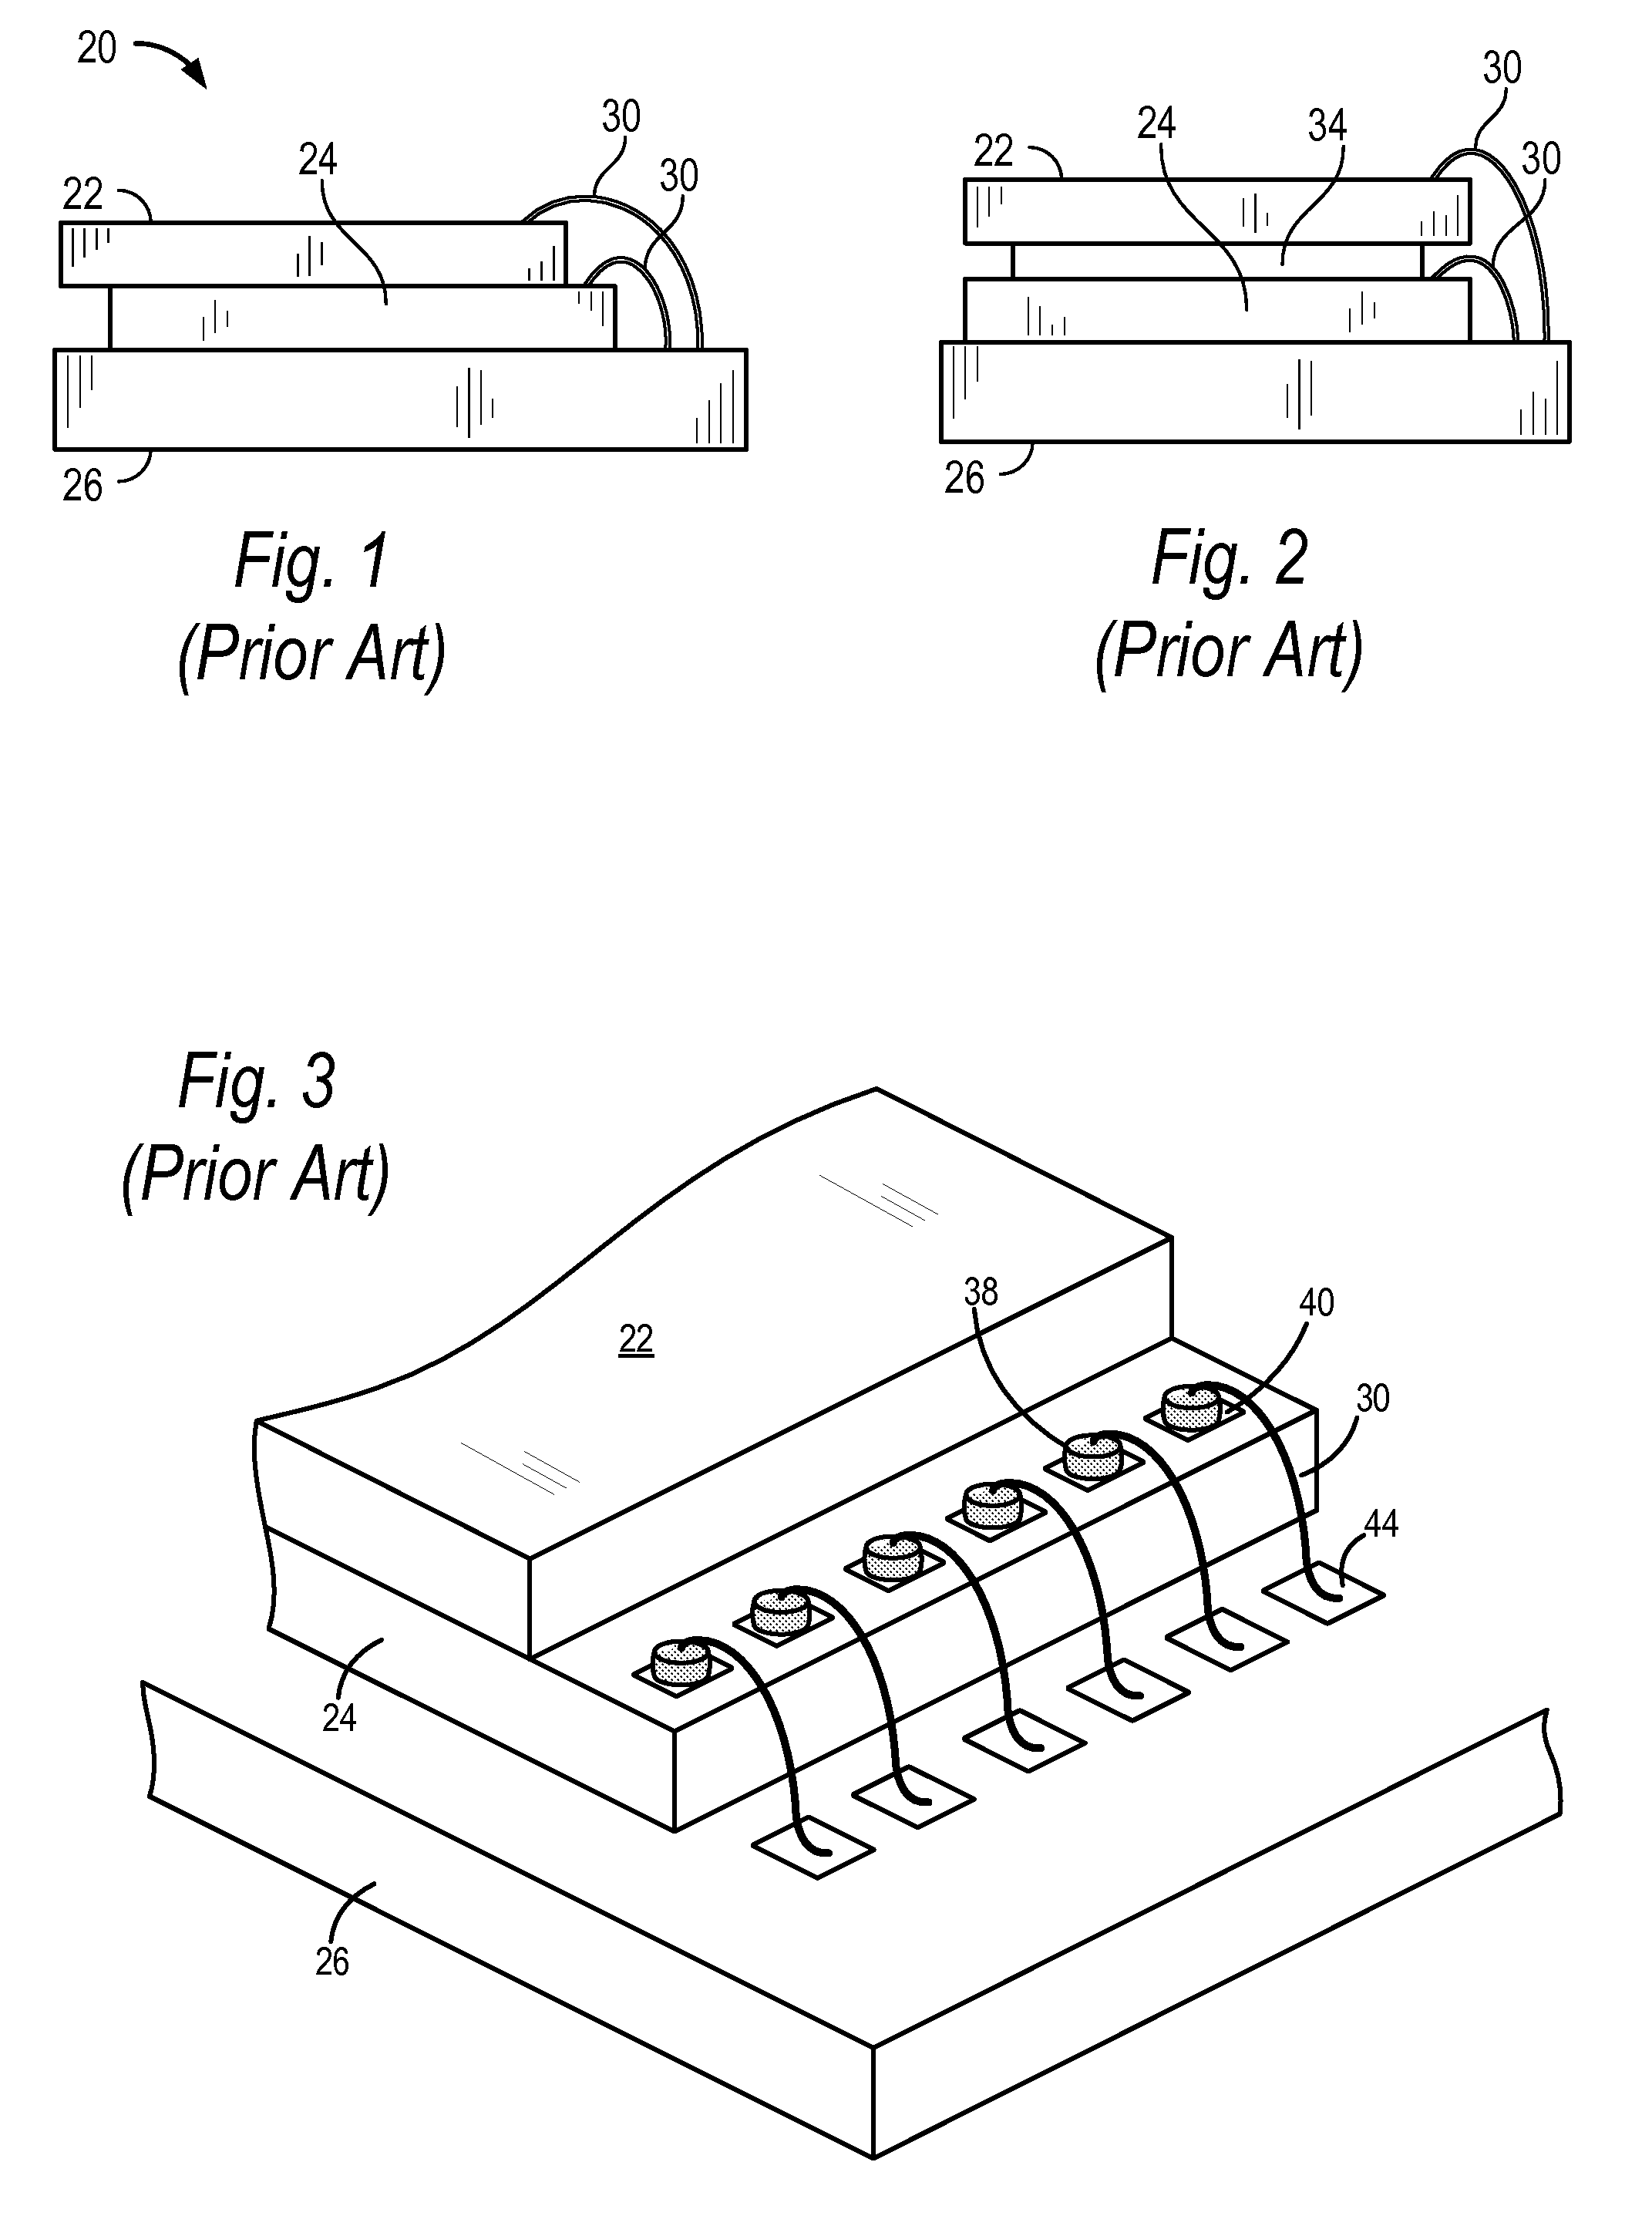 Method of fabricating wire on wire stitch bonding in a semiconductor device